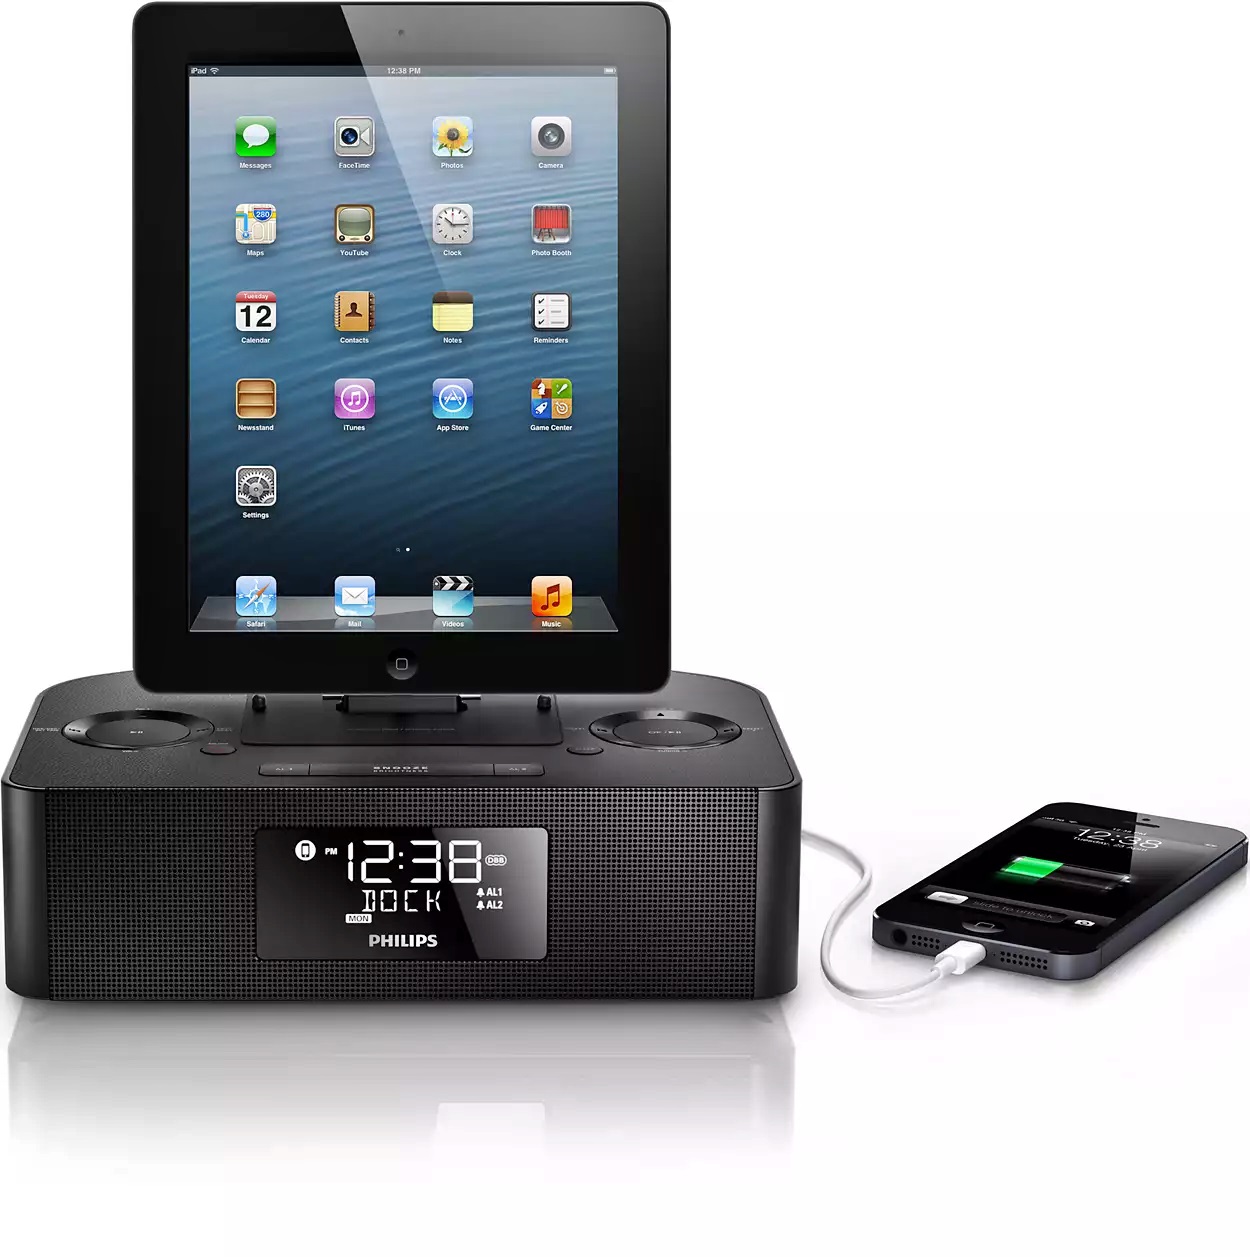 Troubleshooting: Fixing IPod Music Playback Issues On Docking Station